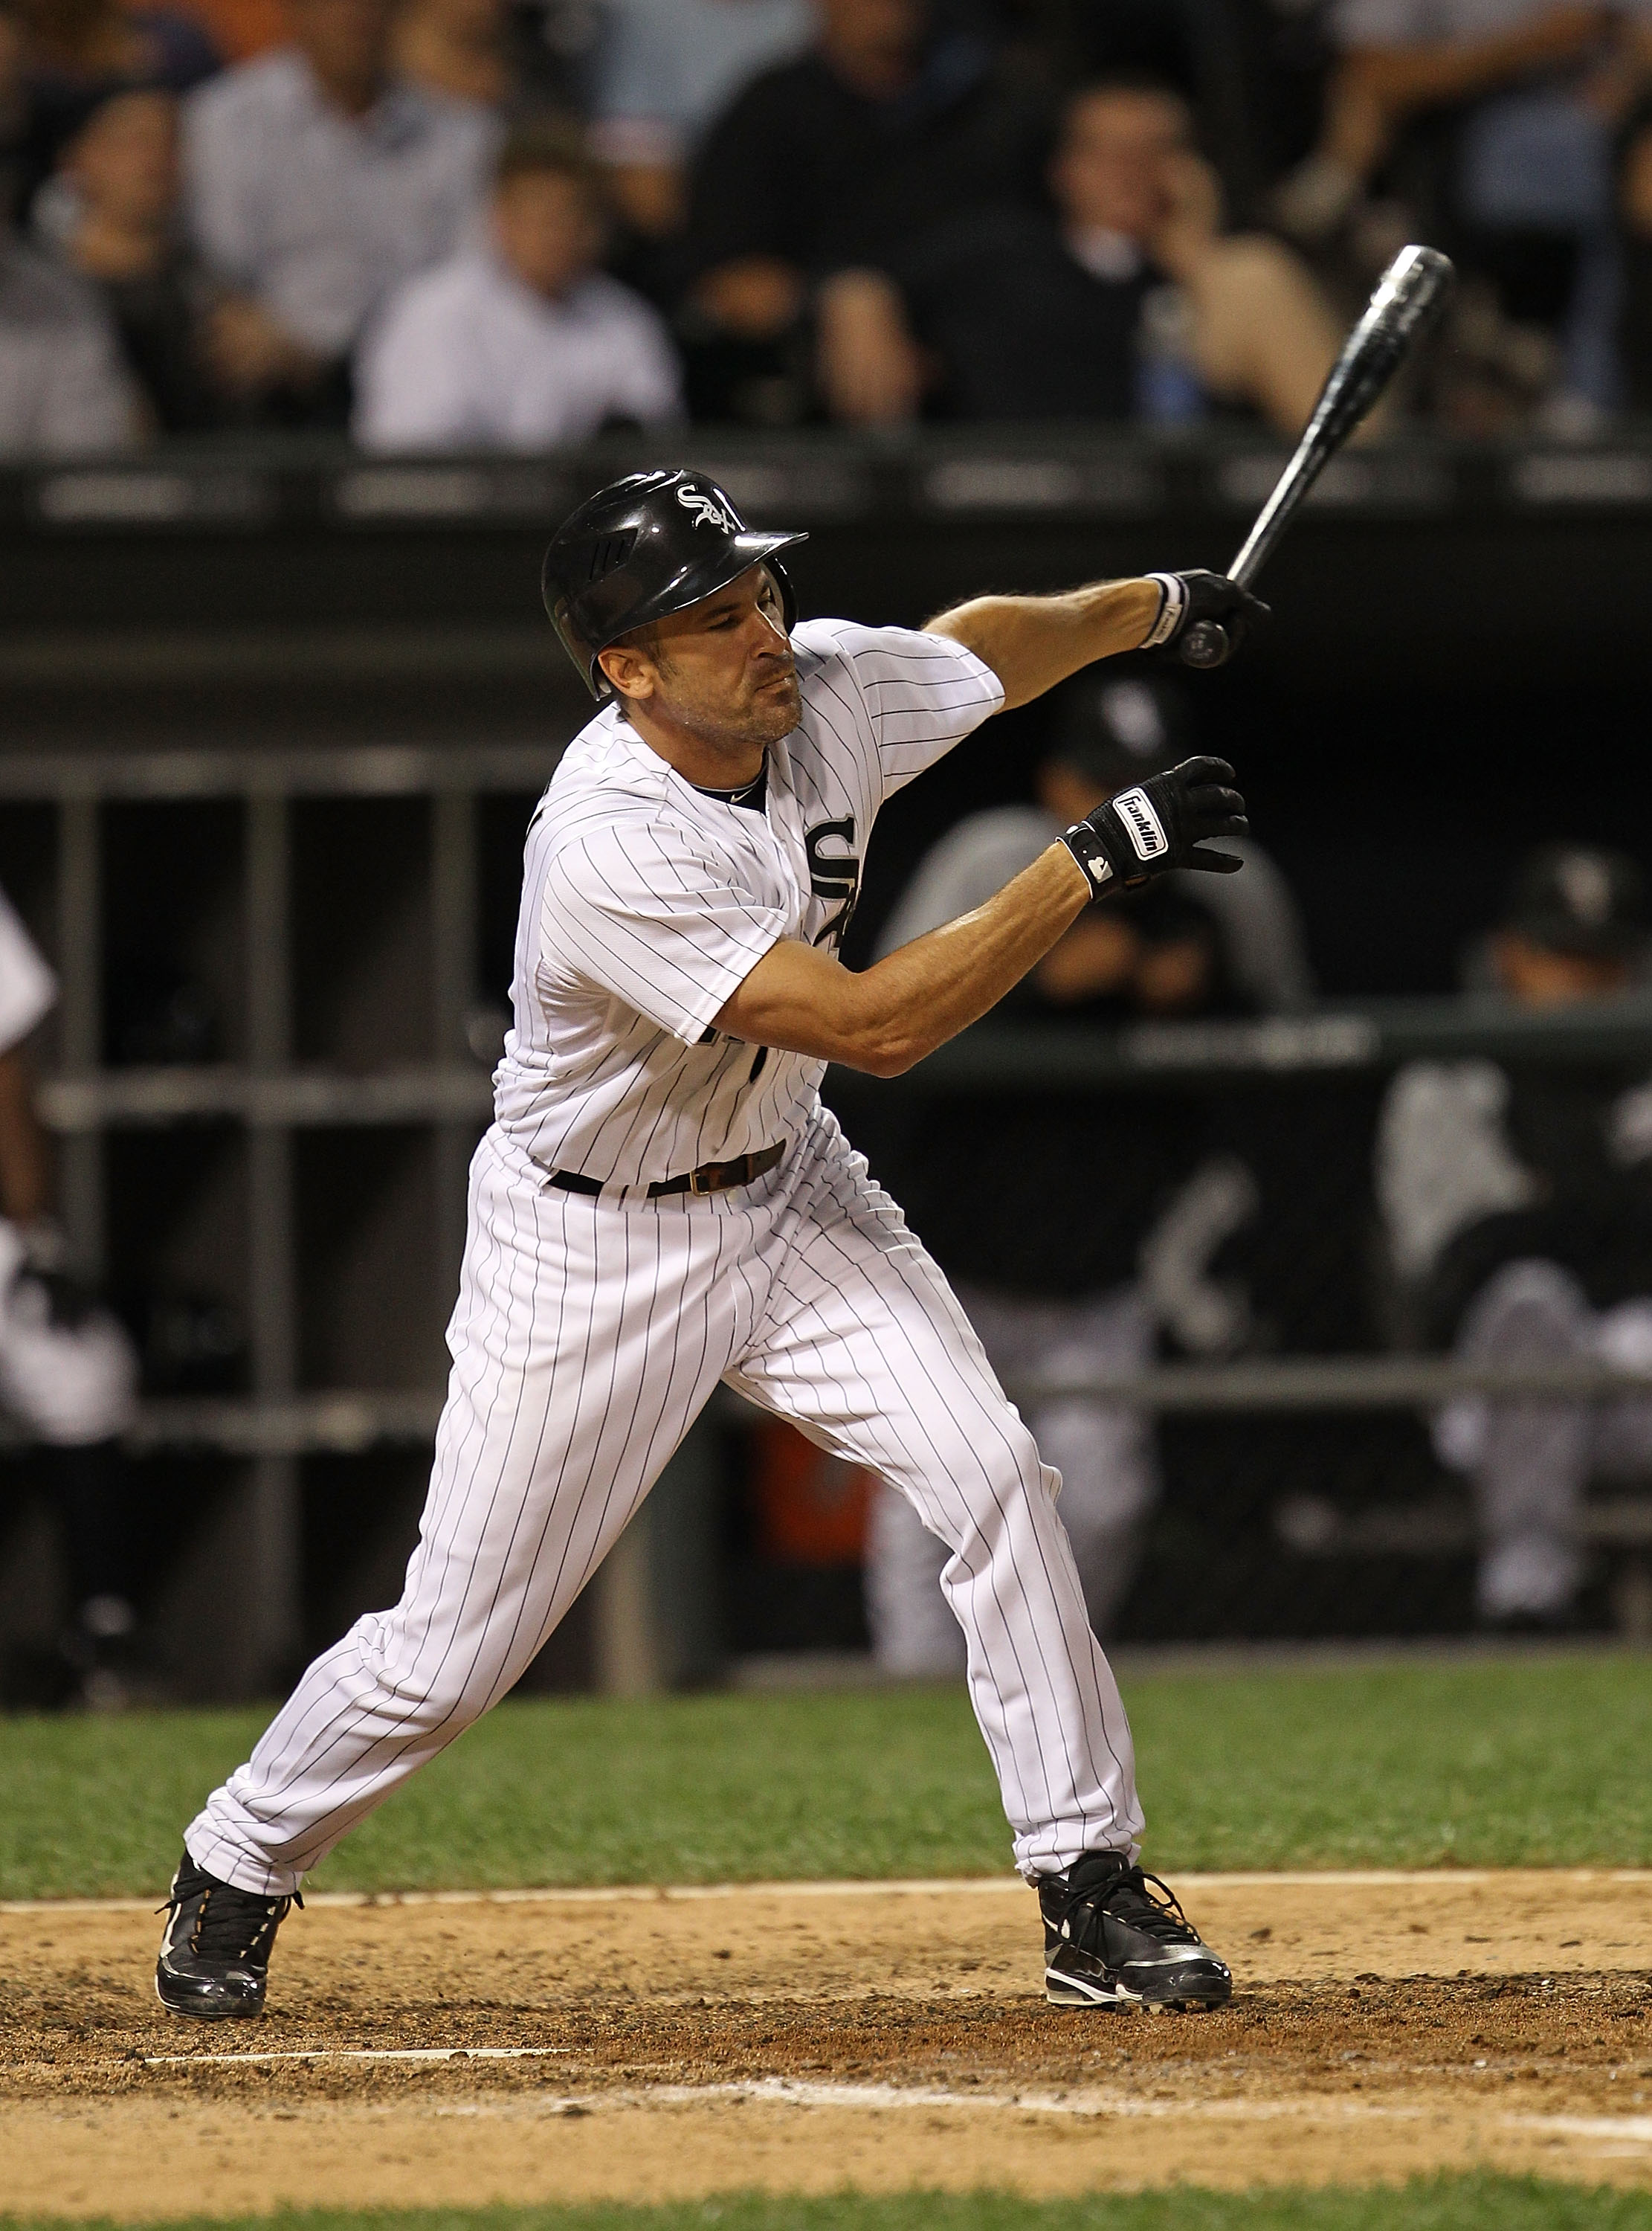 CHICAGO - AUGUST 25: Omar Vizquel #11 of the Chicago White Sox takes a swing against the Baltimore Orioles at U.S. Cellular Field on August 25, 2010 in Chicago, Illinois. The Orioles defeated the White Sox 4-2. (Photo by Jonathan Daniel/Getty Images)